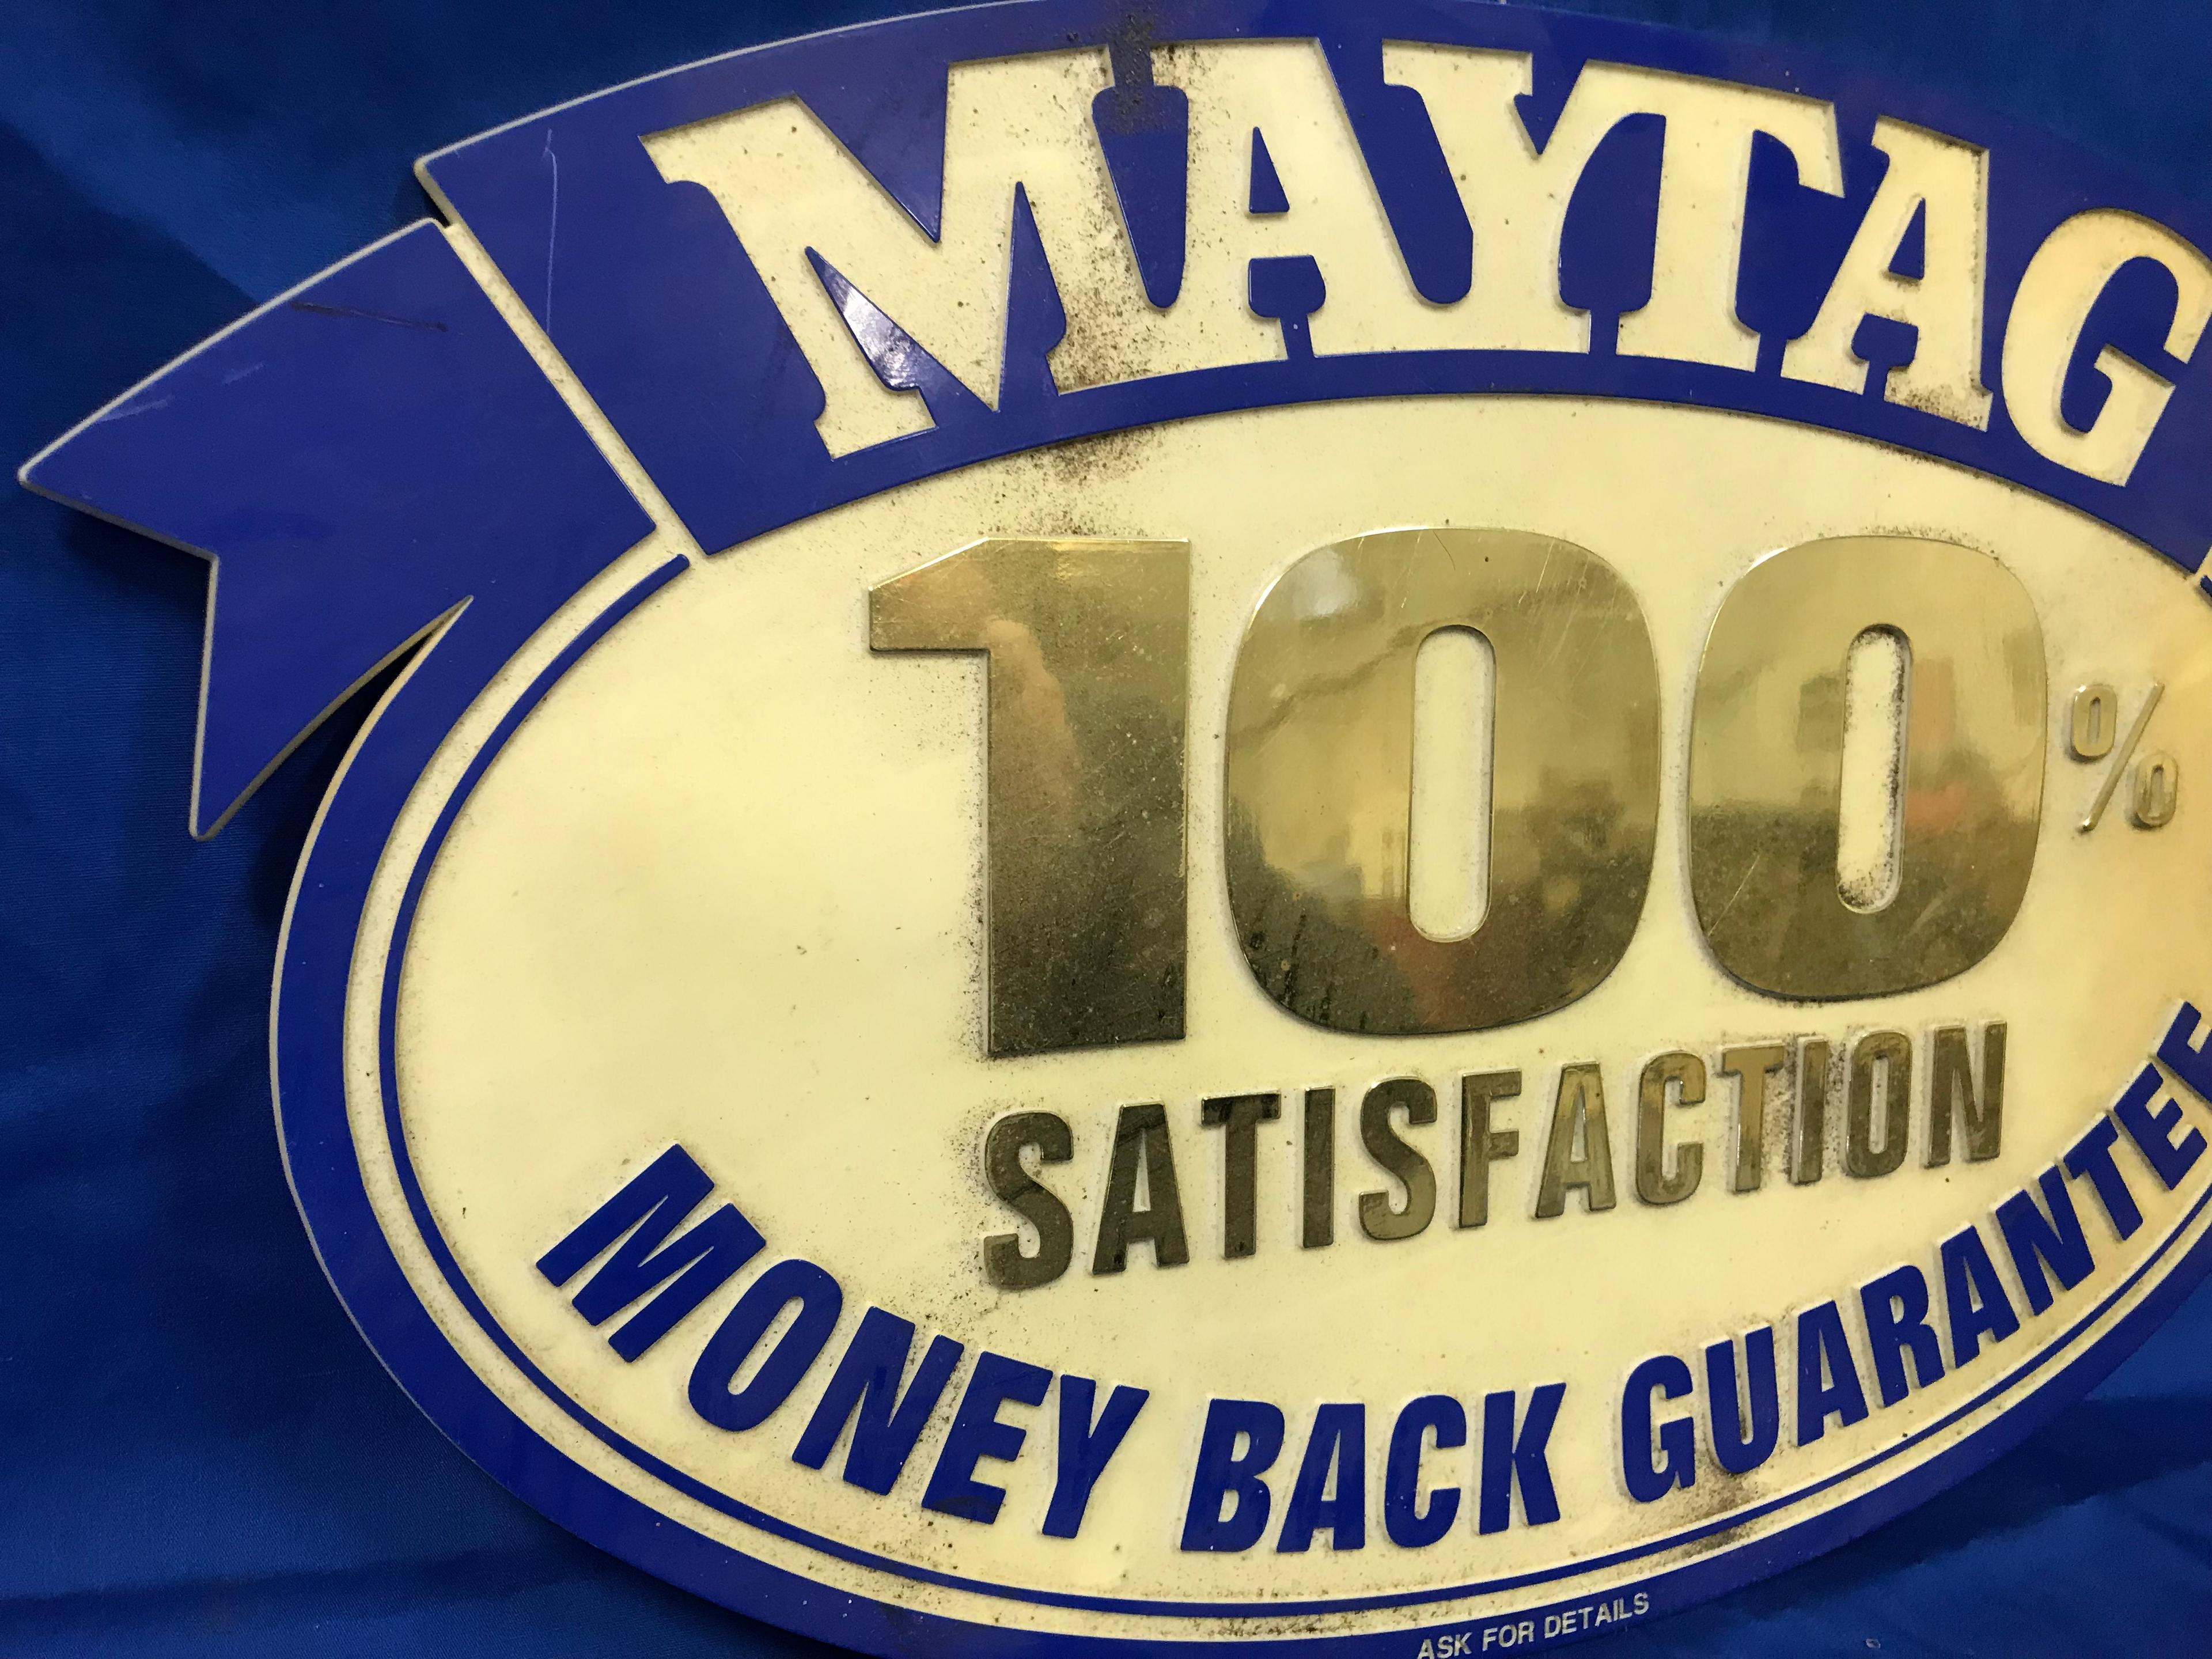 PLASTIC MAYTAG 100% SATISFACTION SIGN